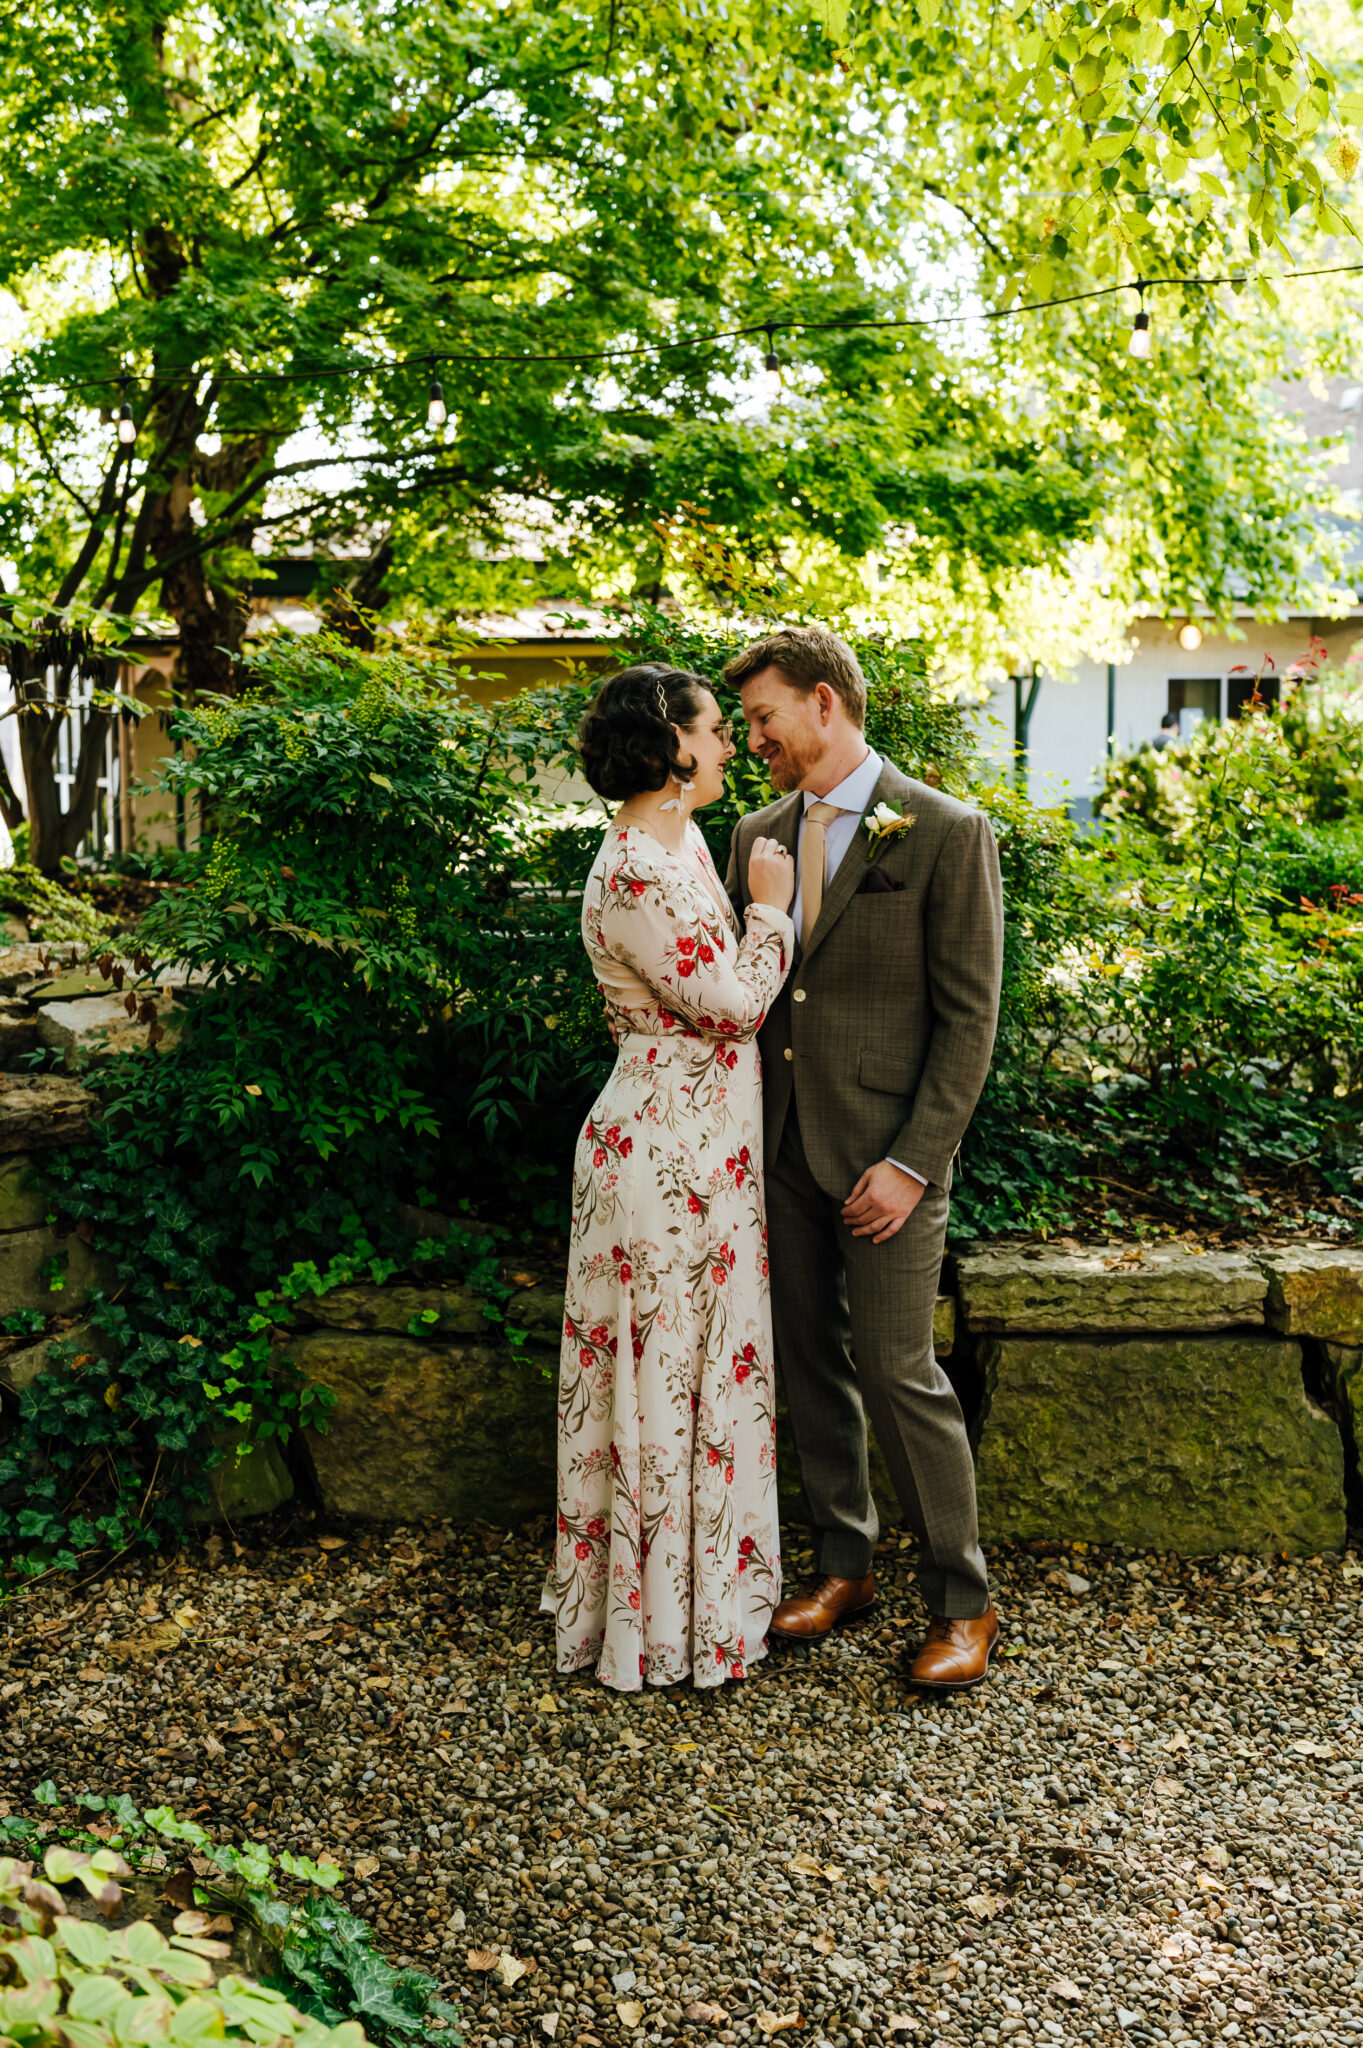 Couple embraces outdoors in a lush garden setting